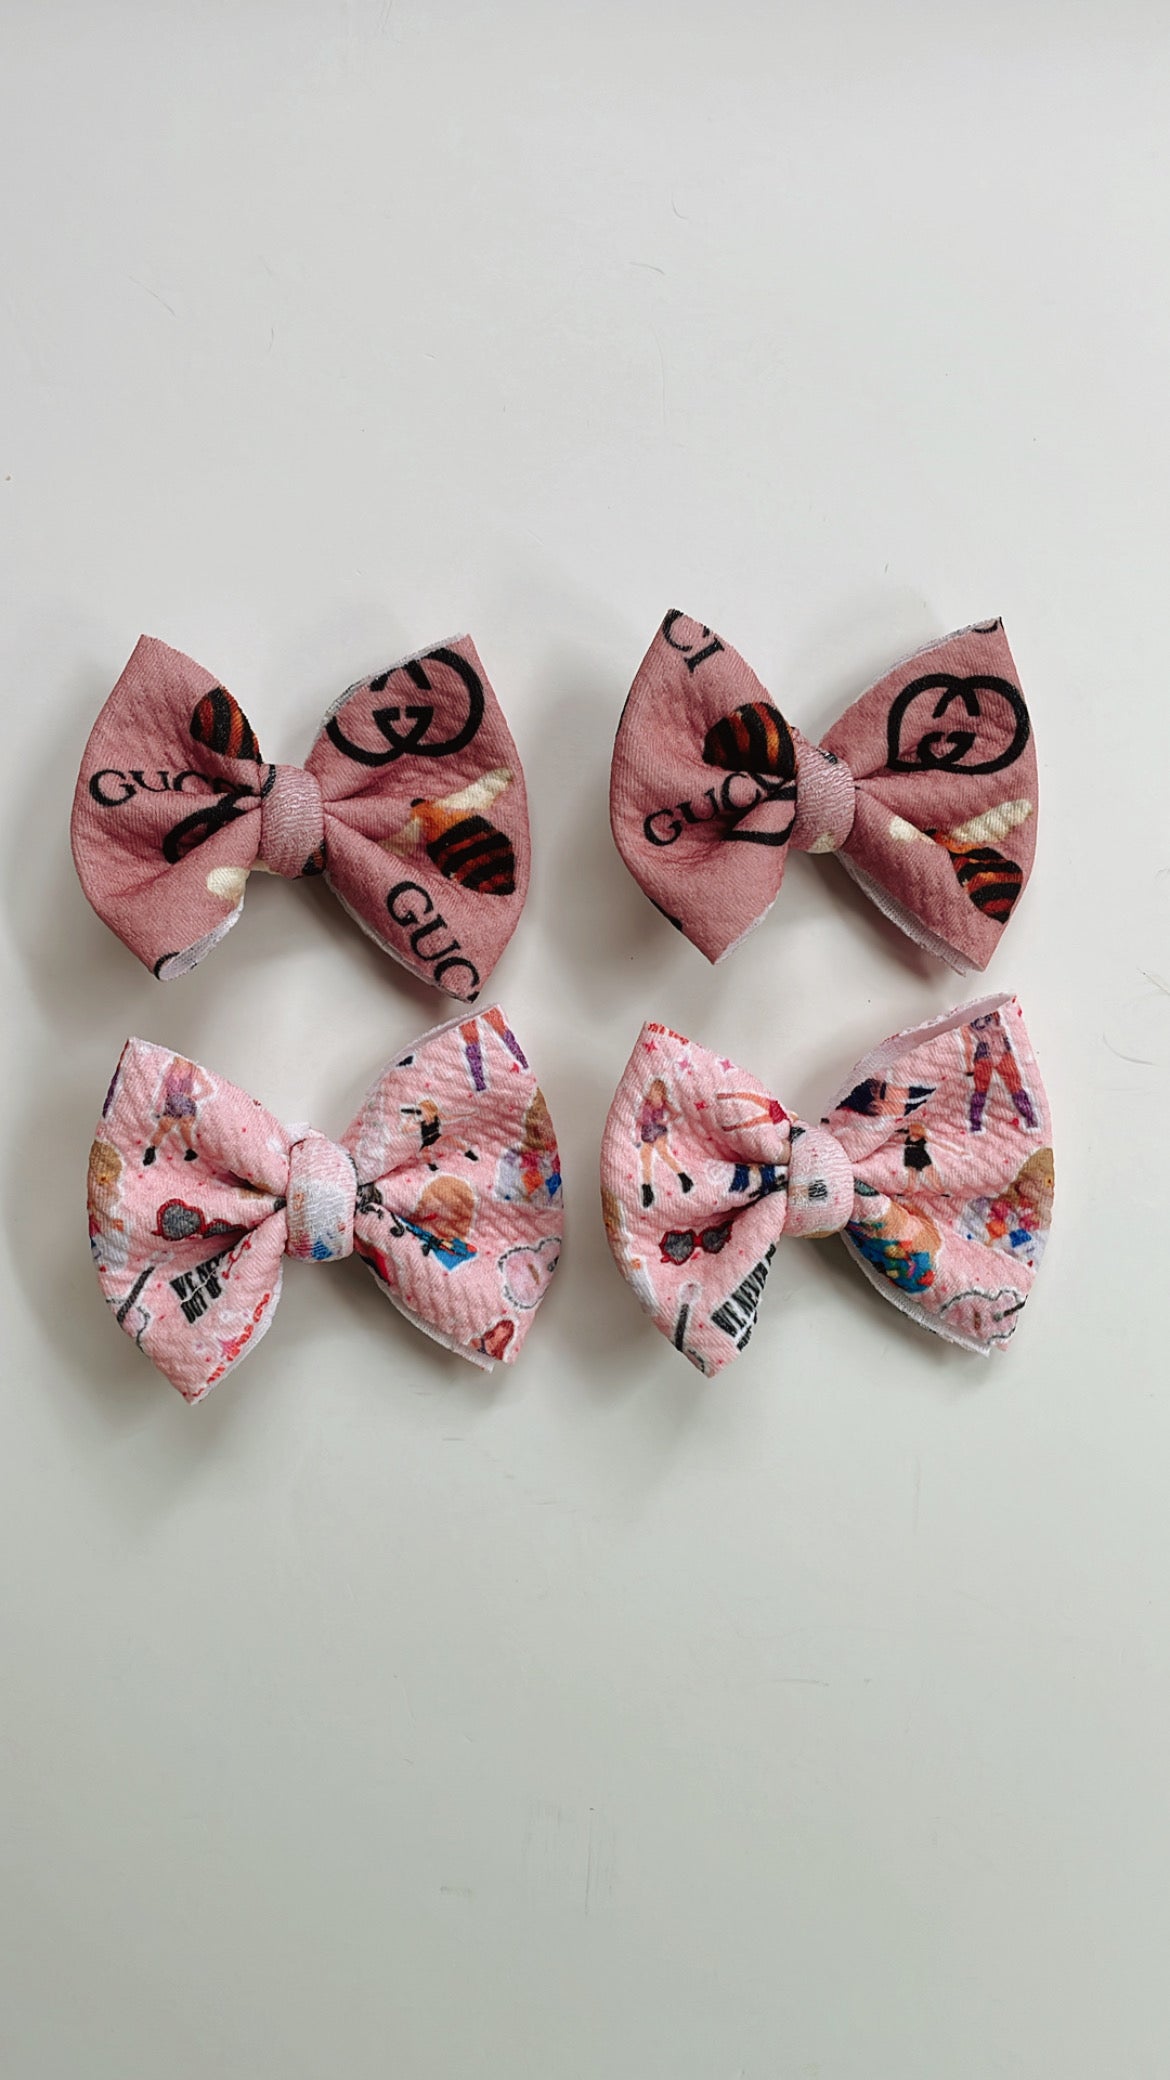 Traditional Bows - Never goin’ out of style - Ev's Bowtique Shop